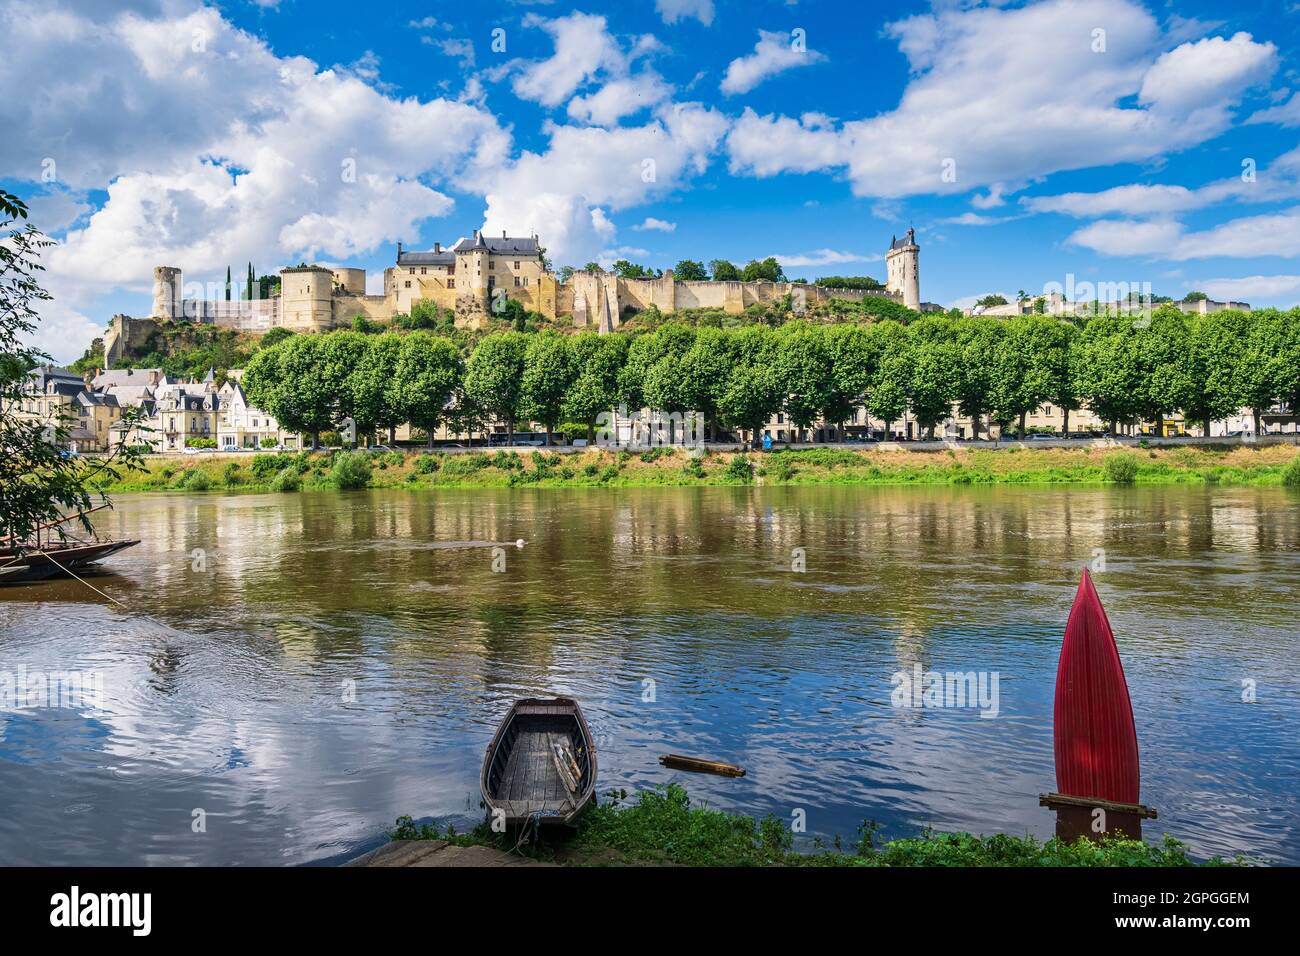 France, Indre-et-Loire, Val de Loire listed as a UNESCO World Heritage Site, Chinon, the royal fortress overlooking the Vienne river Stock Photo